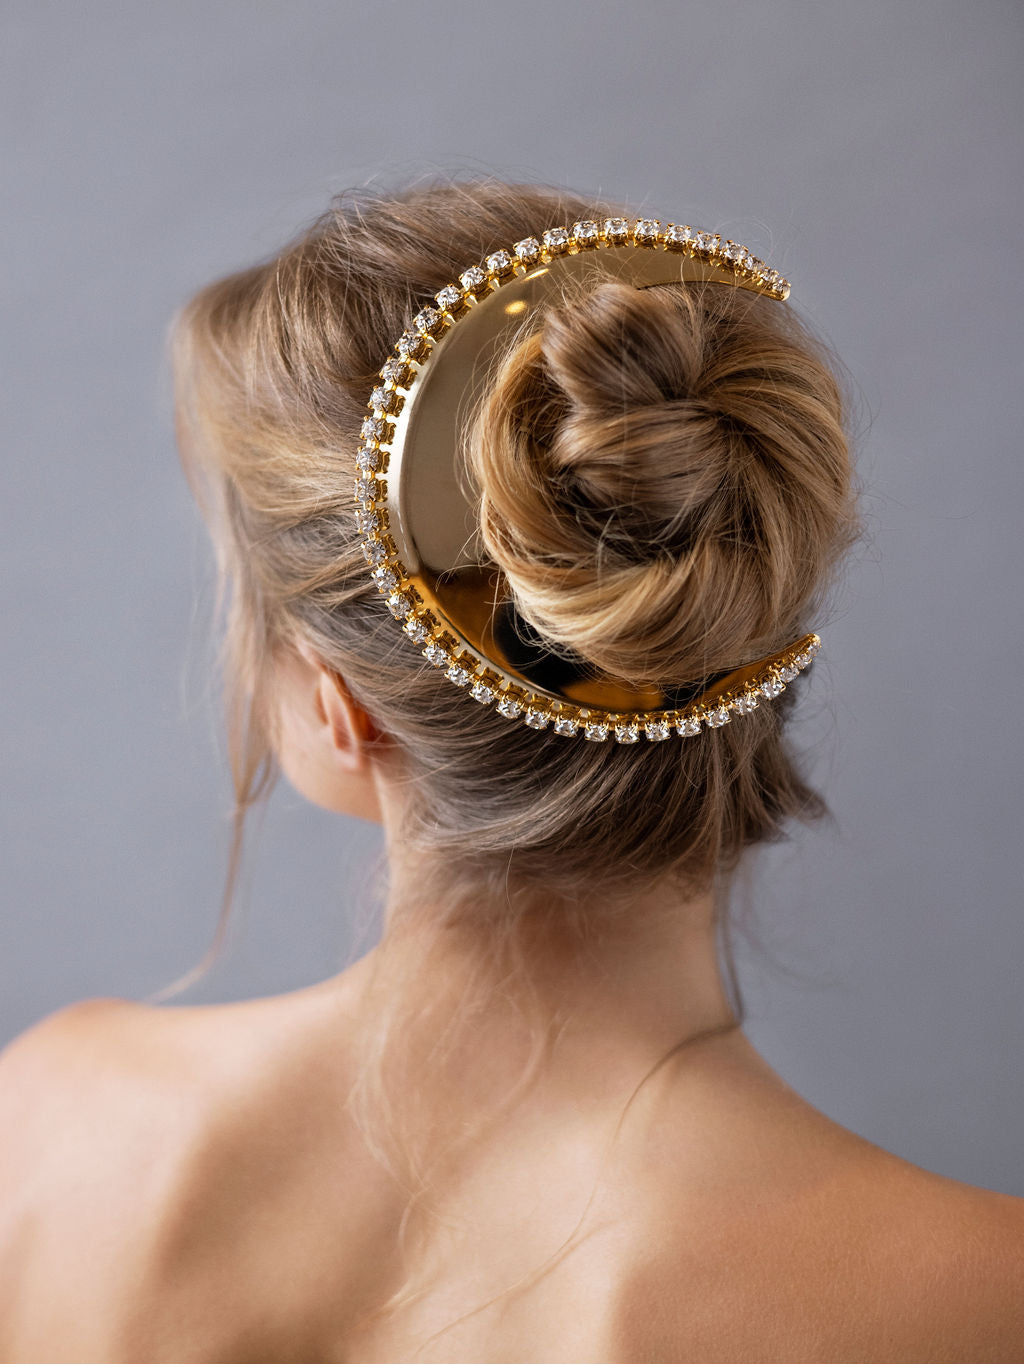 CRYSTAL CRESCENT MOON BARRETTE - Epona Valley | Luxury Hair Accessories | Bridal Accessories | Made In NYC